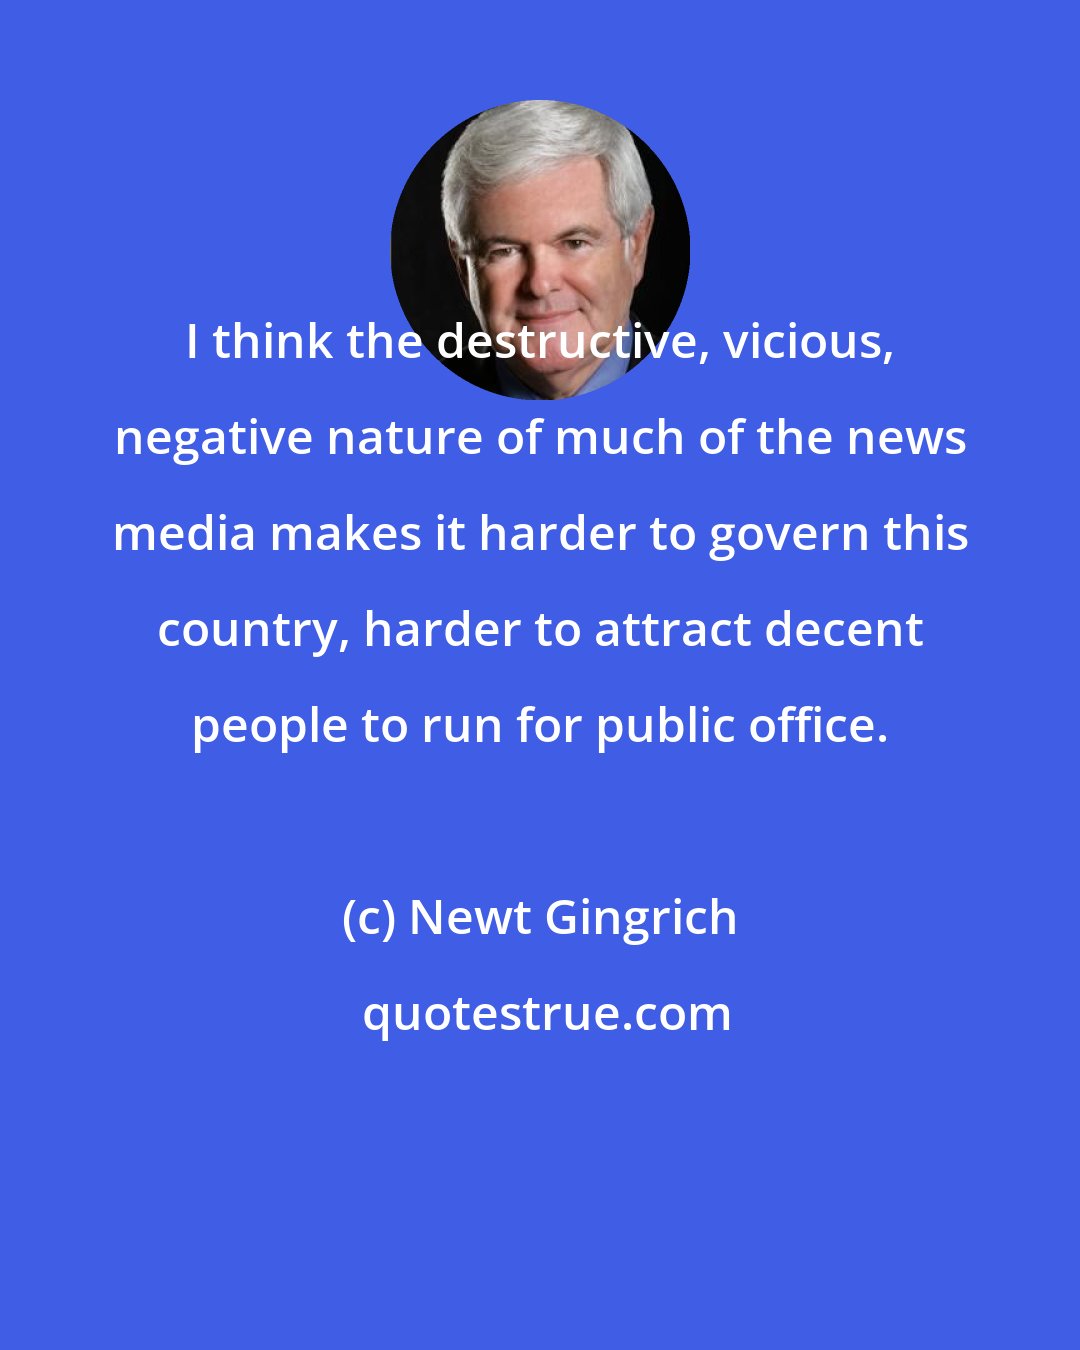 Newt Gingrich: I think the destructive, vicious, negative nature of much of the news media makes it harder to govern this country, harder to attract decent people to run for public office.